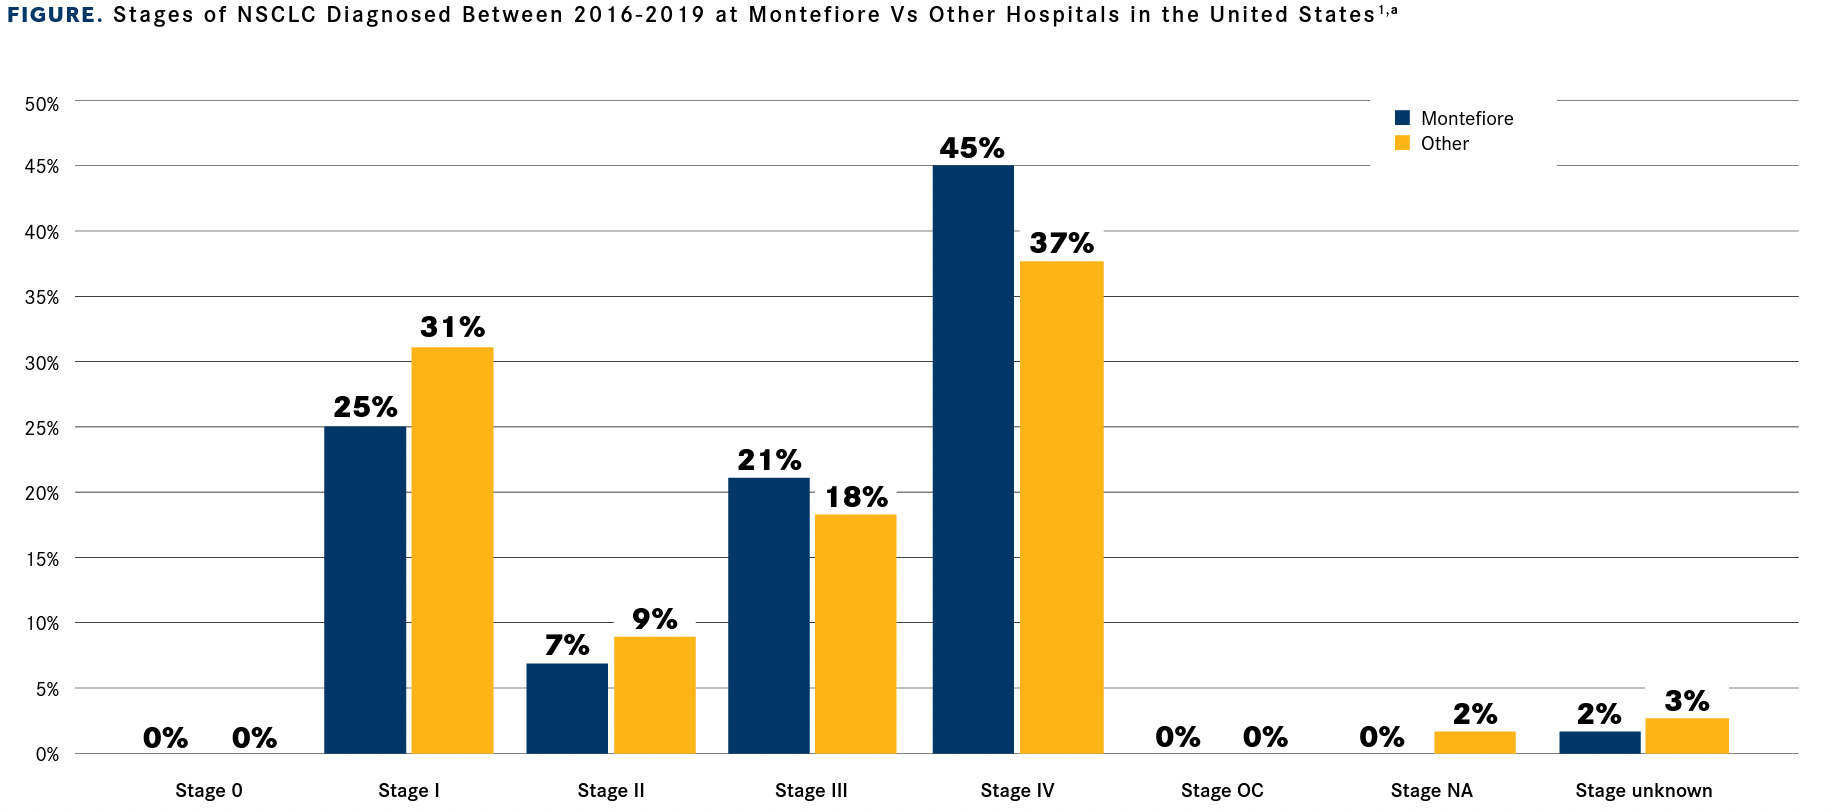 FIGURE. Stages of NSCLC Diagnosed Between 2016-2019 at Montefiore Vs Other Hospitals in the United States